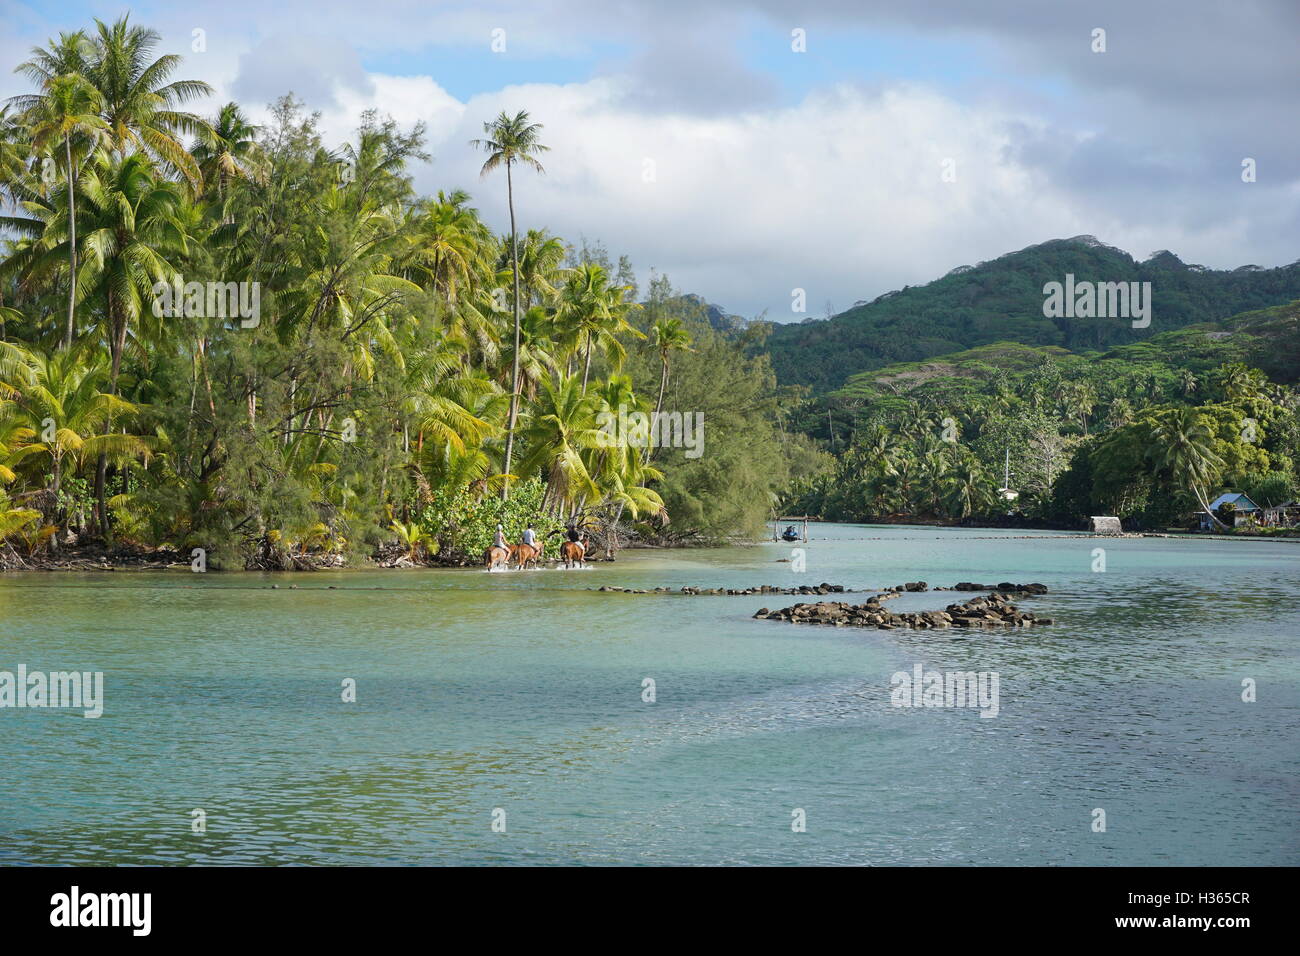 Shallow channel with stone fish trap and tourists riding horses in the water, island of Huahine, South Pacific, French Polynesia Stock Photo